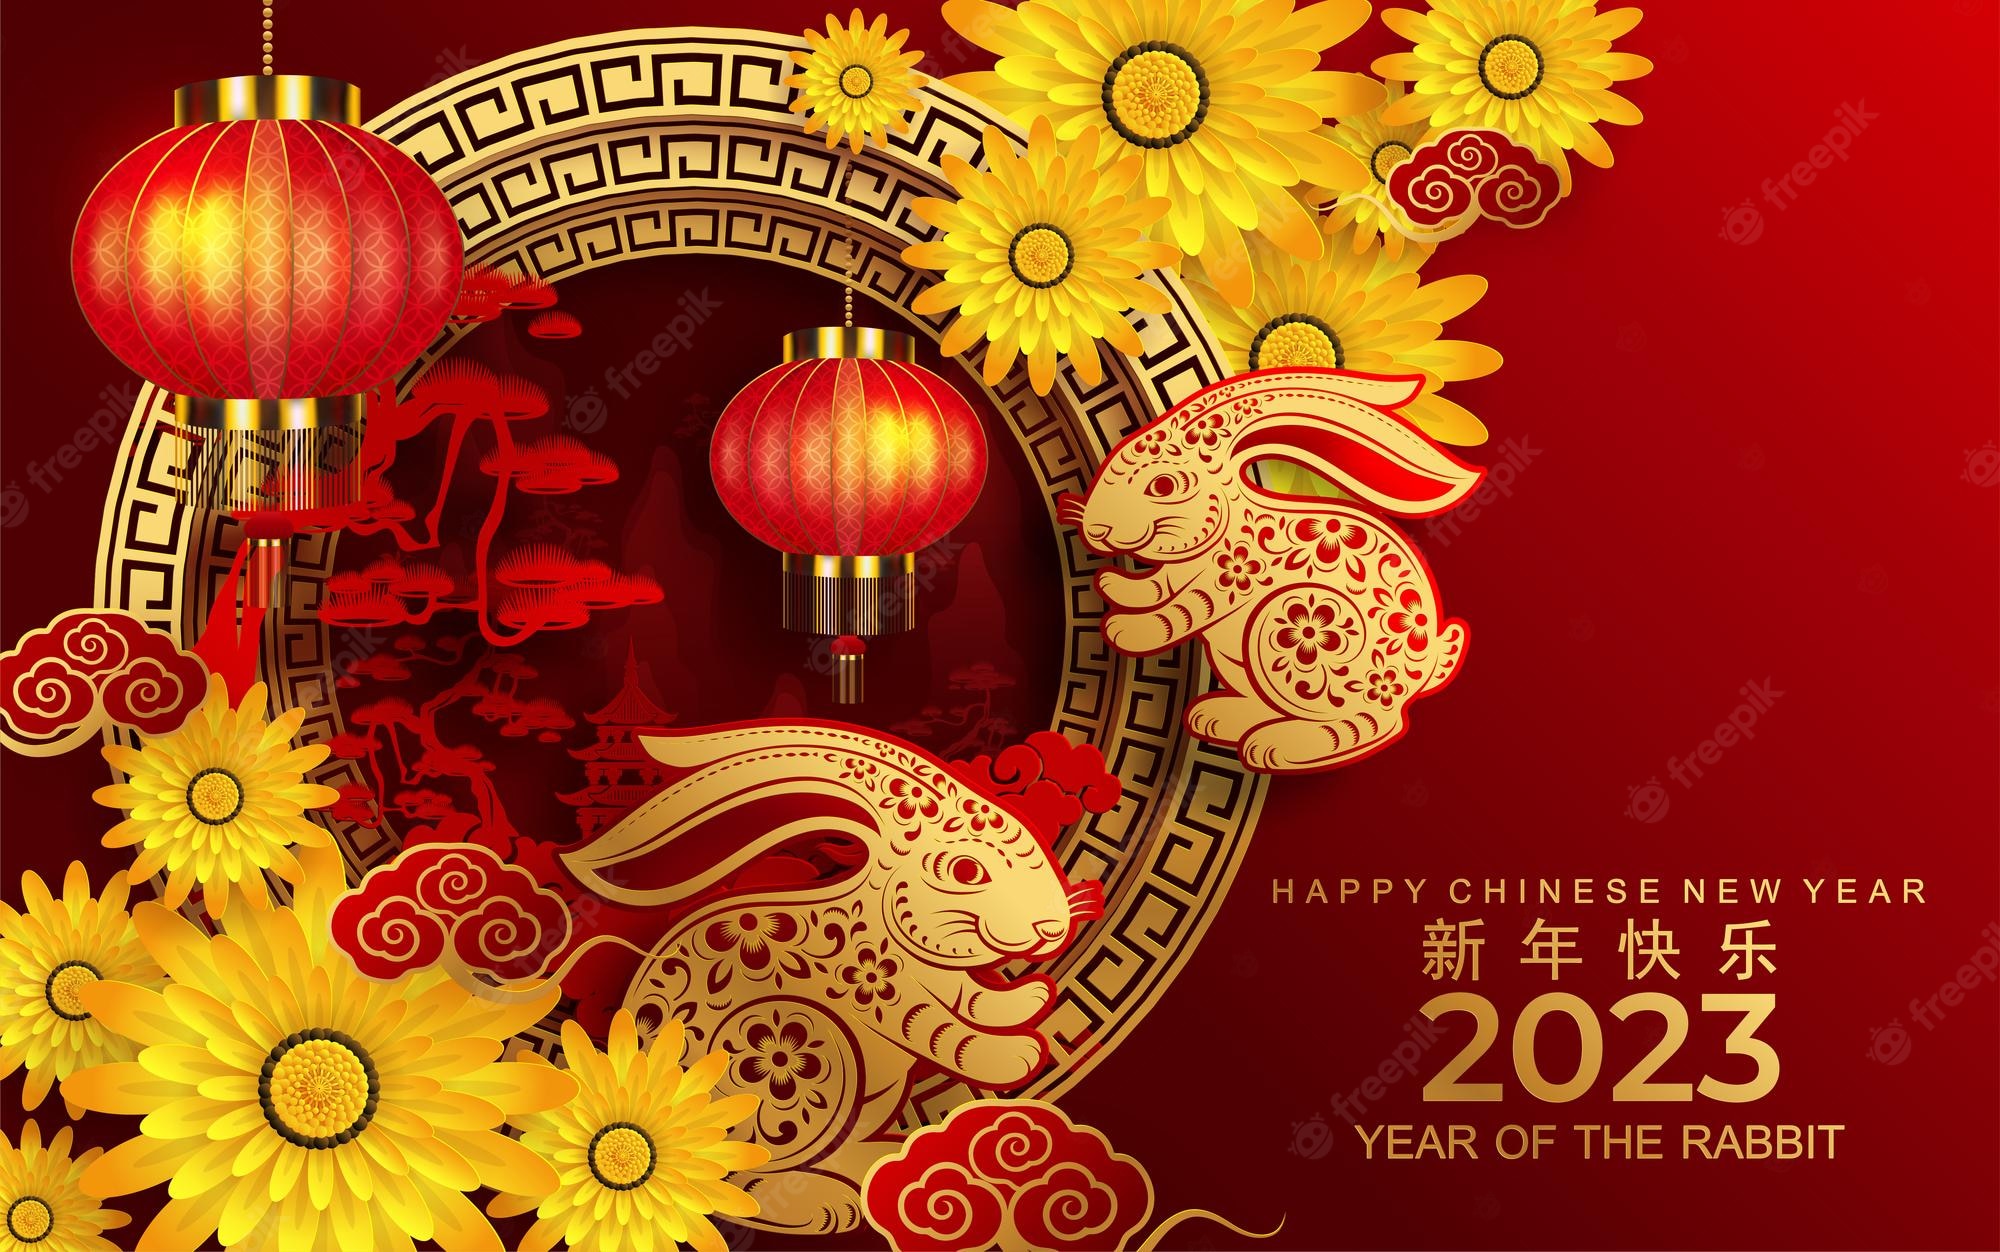 2023 Lunar New Year Wallpapers Wallpaper Cave